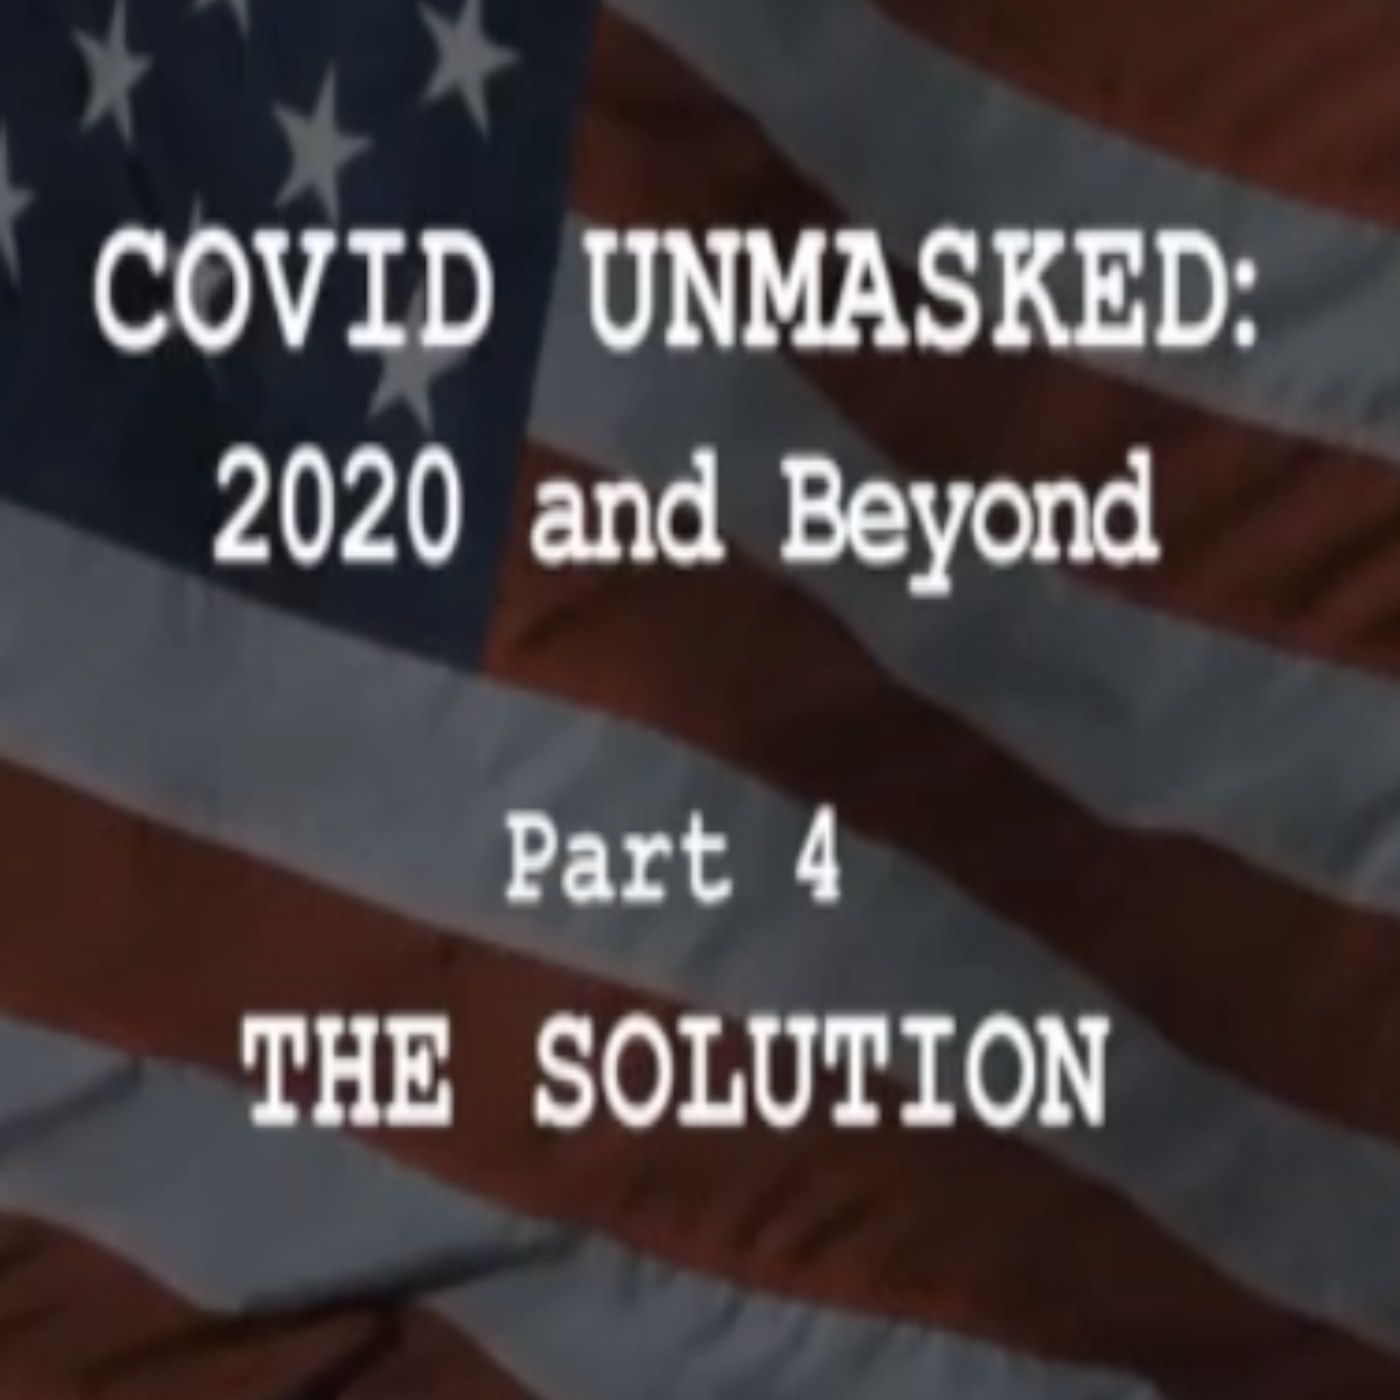 Covid Unmasked part 4 ~ The Solution!